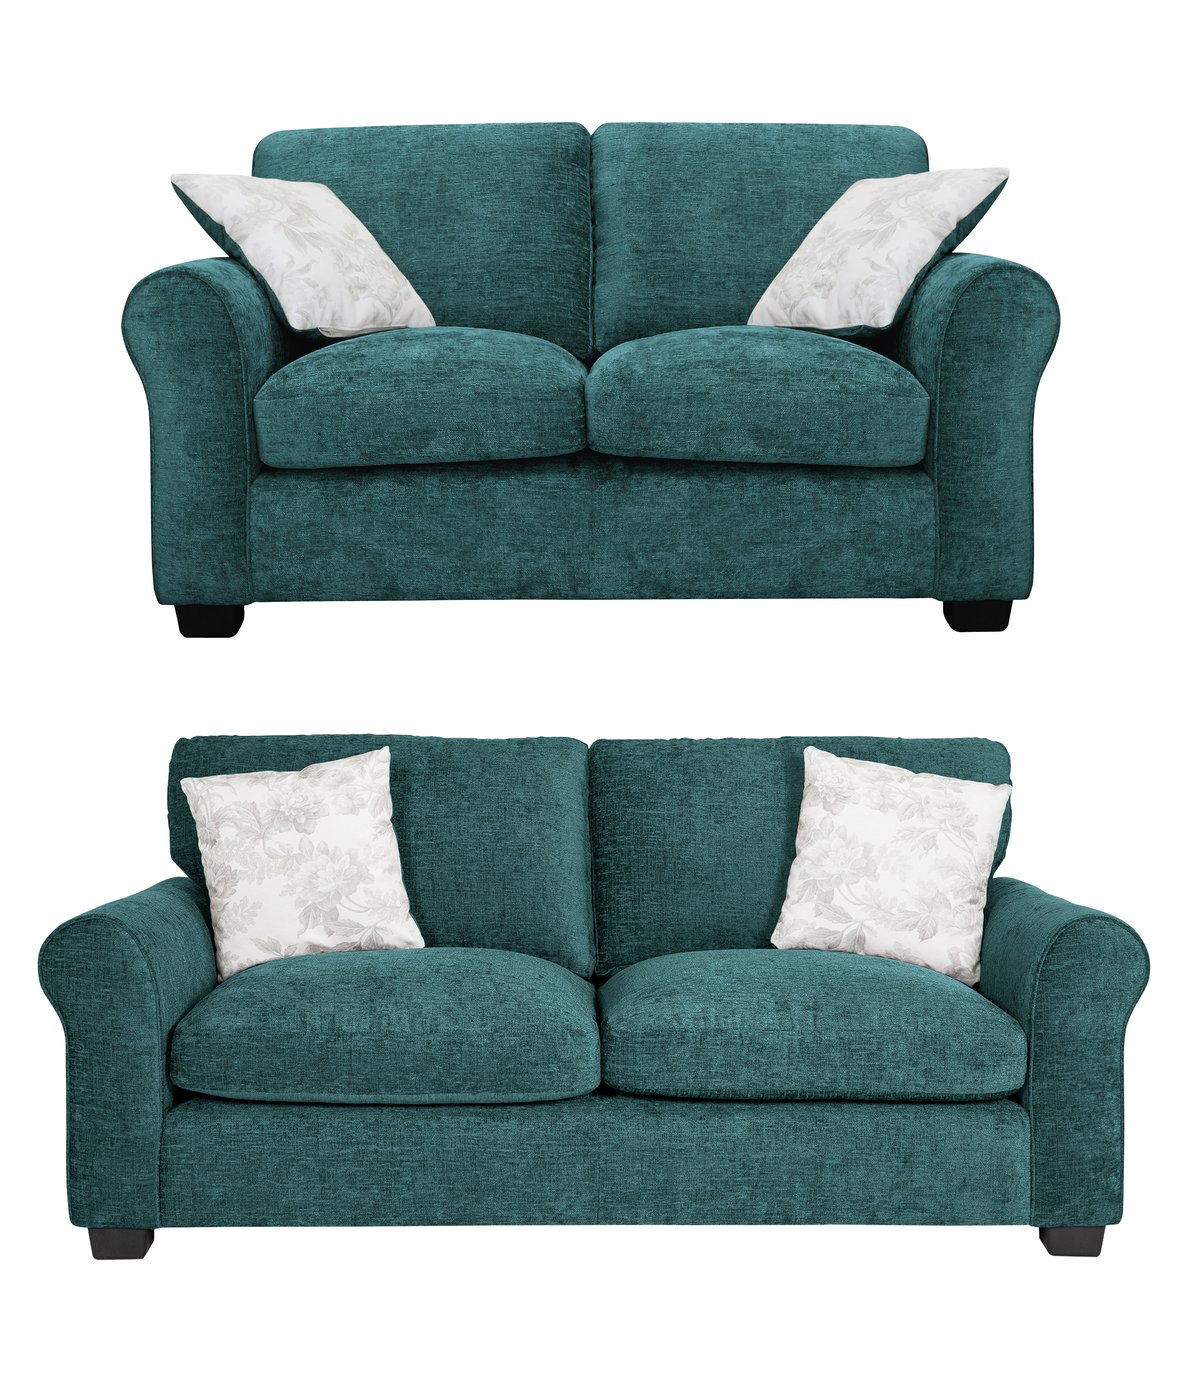 Argos Home Tammy Fabric 2 Seater and 3 Seater Sofa - Teal